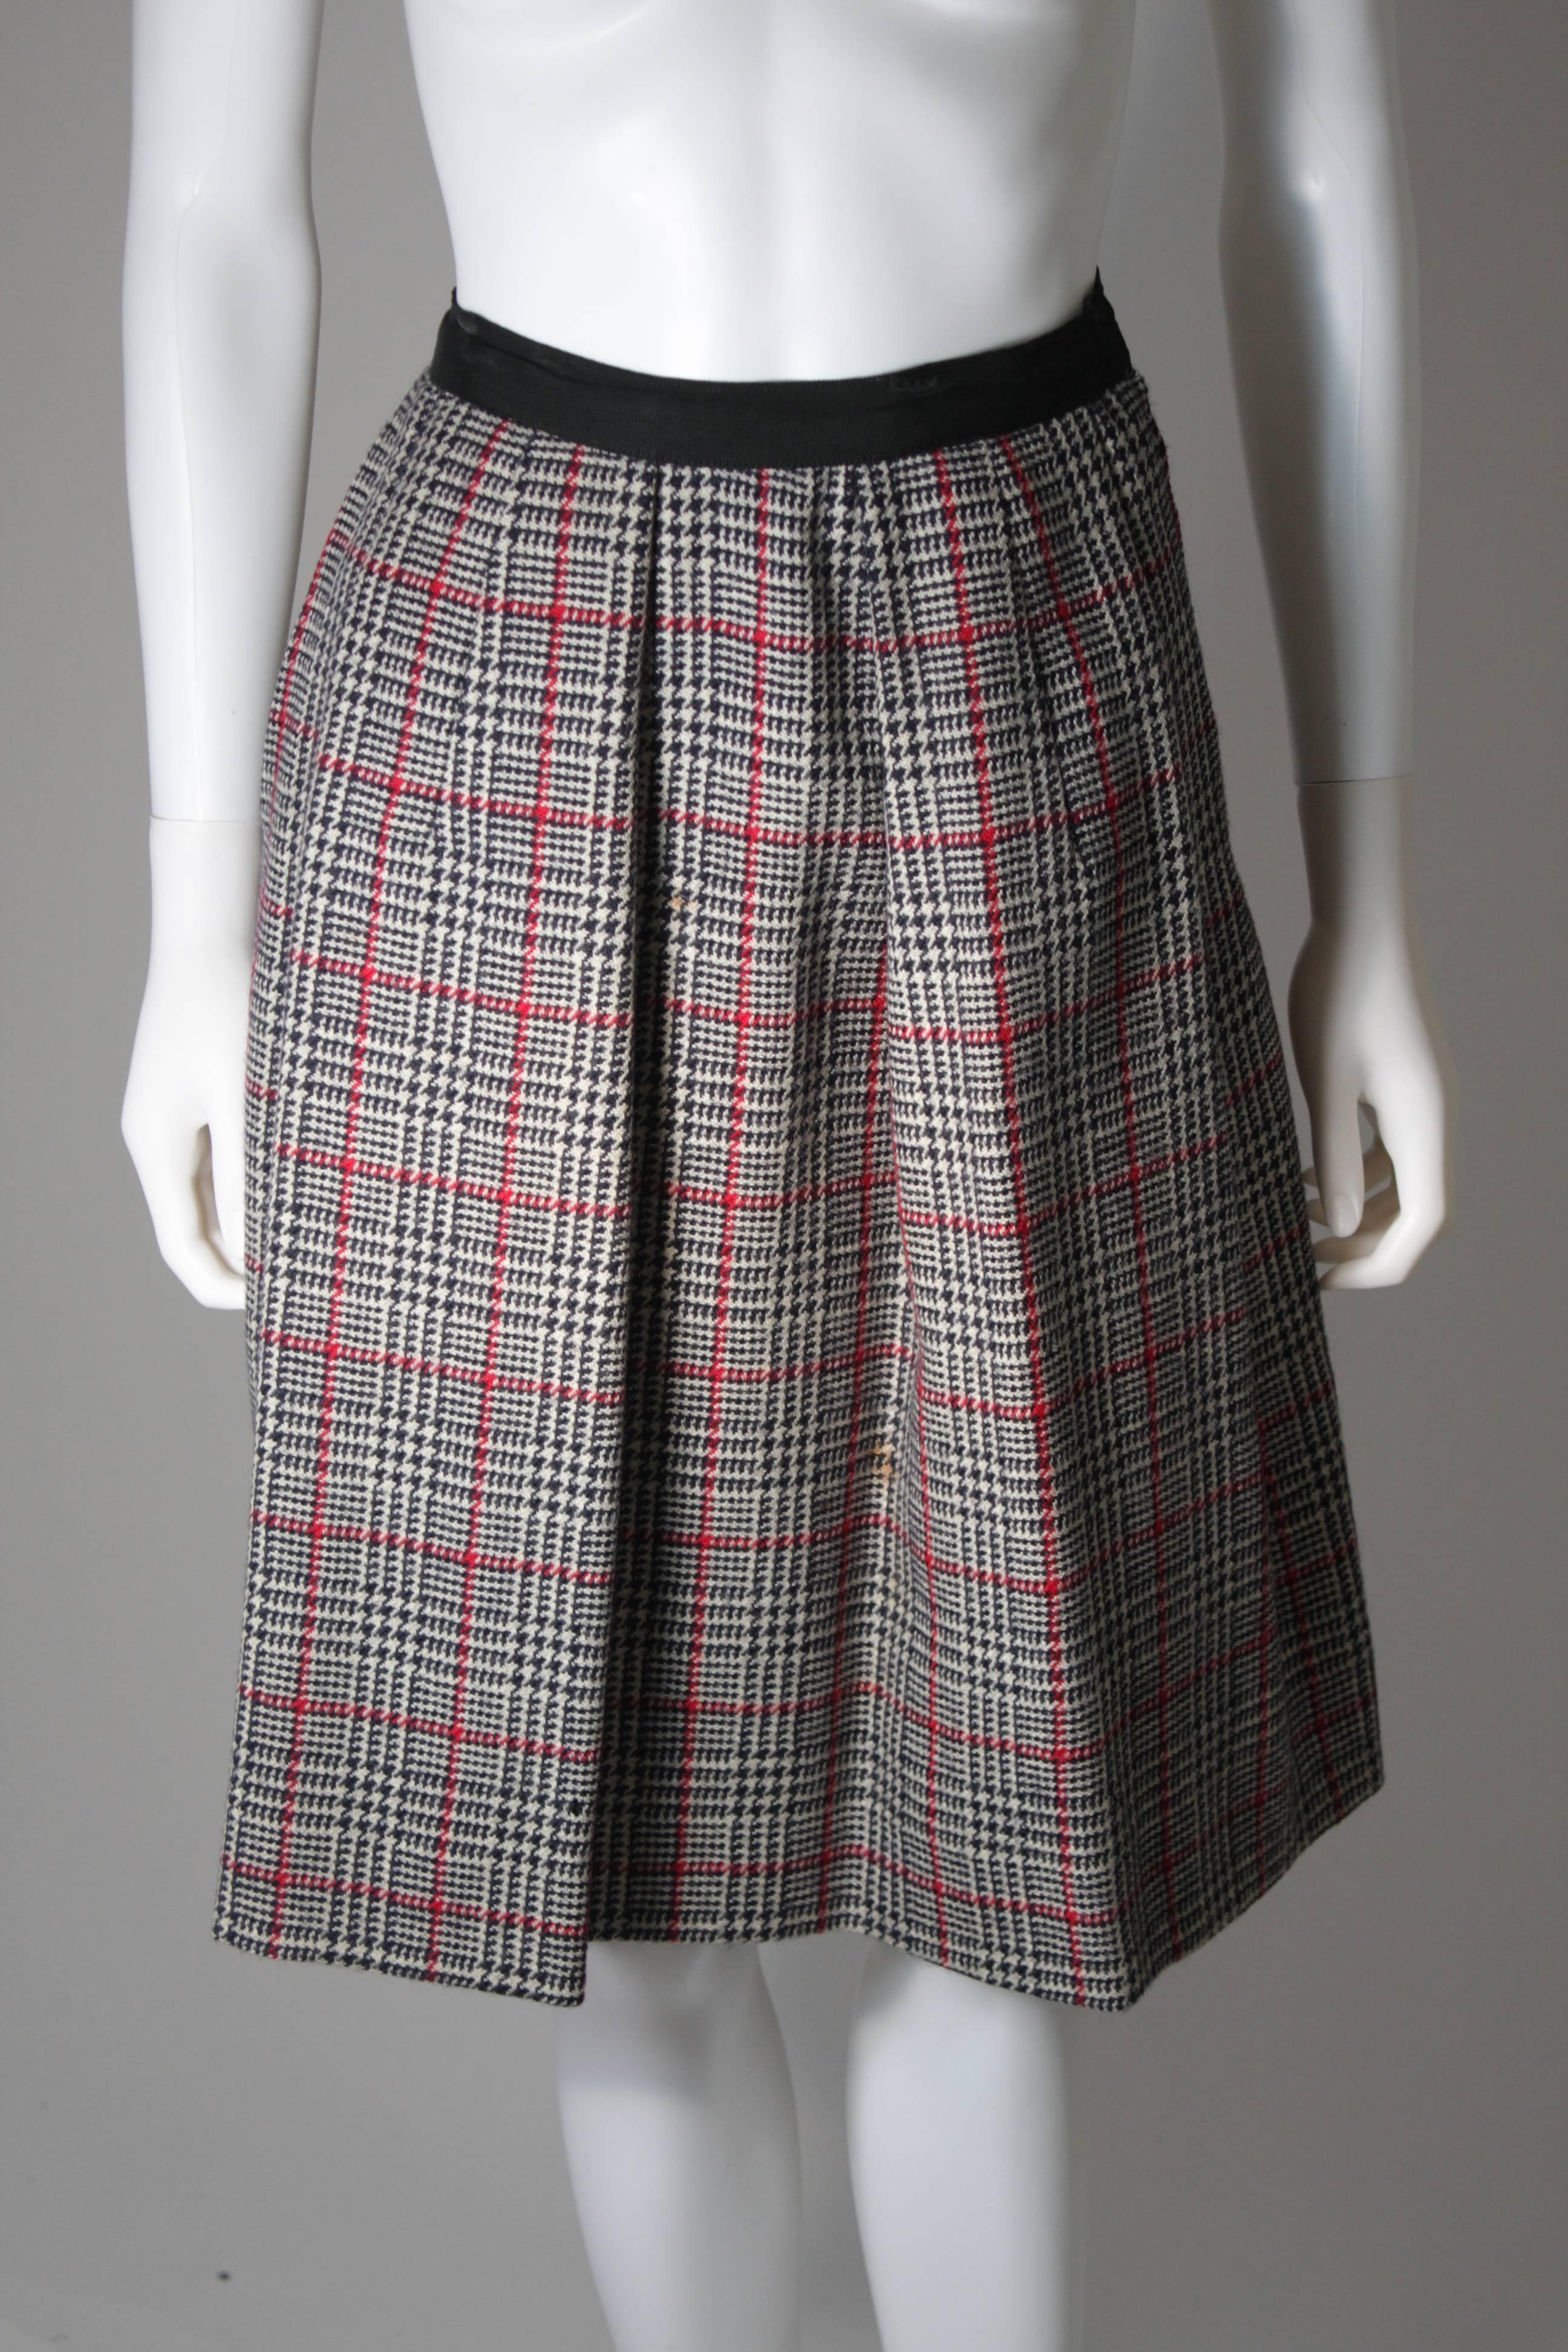 Galanos Black White and Red Wool Plaid Skirt Suit 4 Piece Size Small Medium For Sale 1